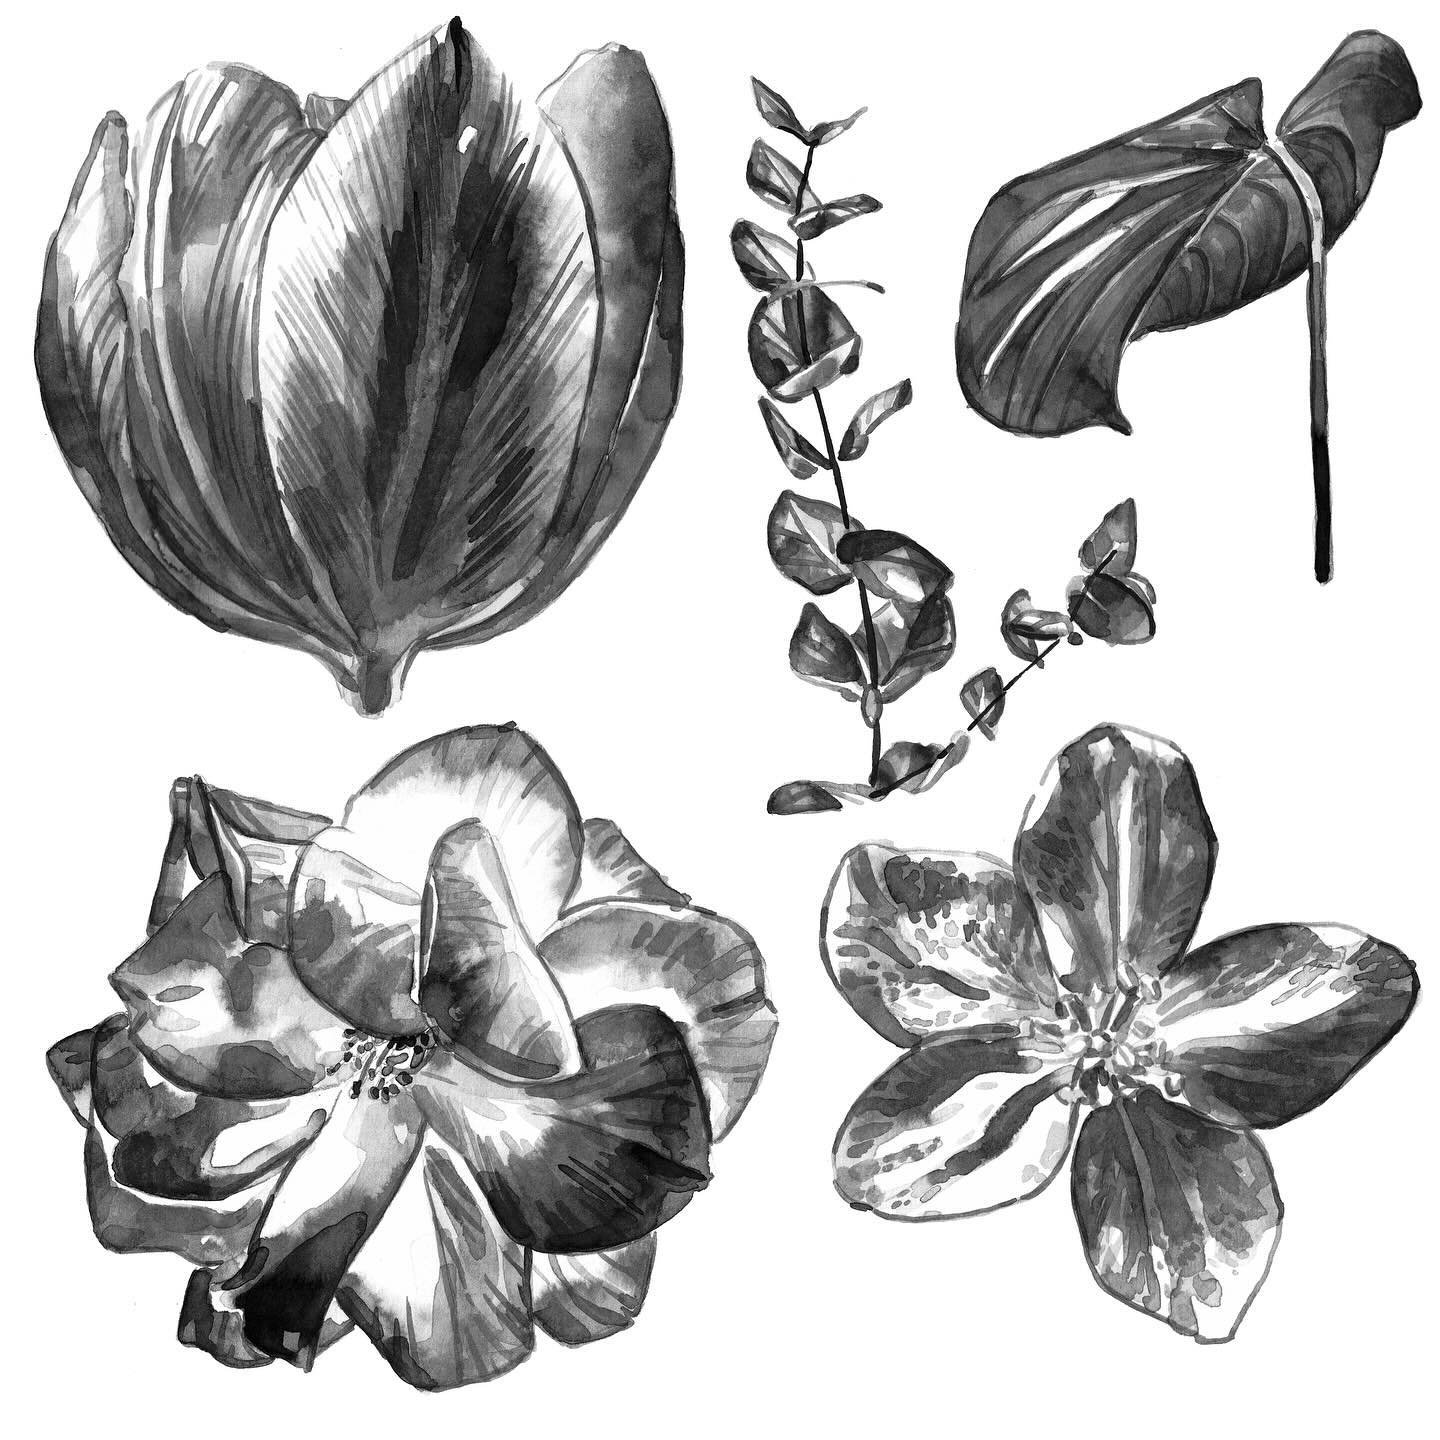 Here are a few ink botanicals from the UC San Diego Extended Studies course Playing with Pen and Ink. Ink wash is a lot like watercolor in the expression of interesting effects and gradual layering of tones, which is why I enjoy using it!

#inkart #i